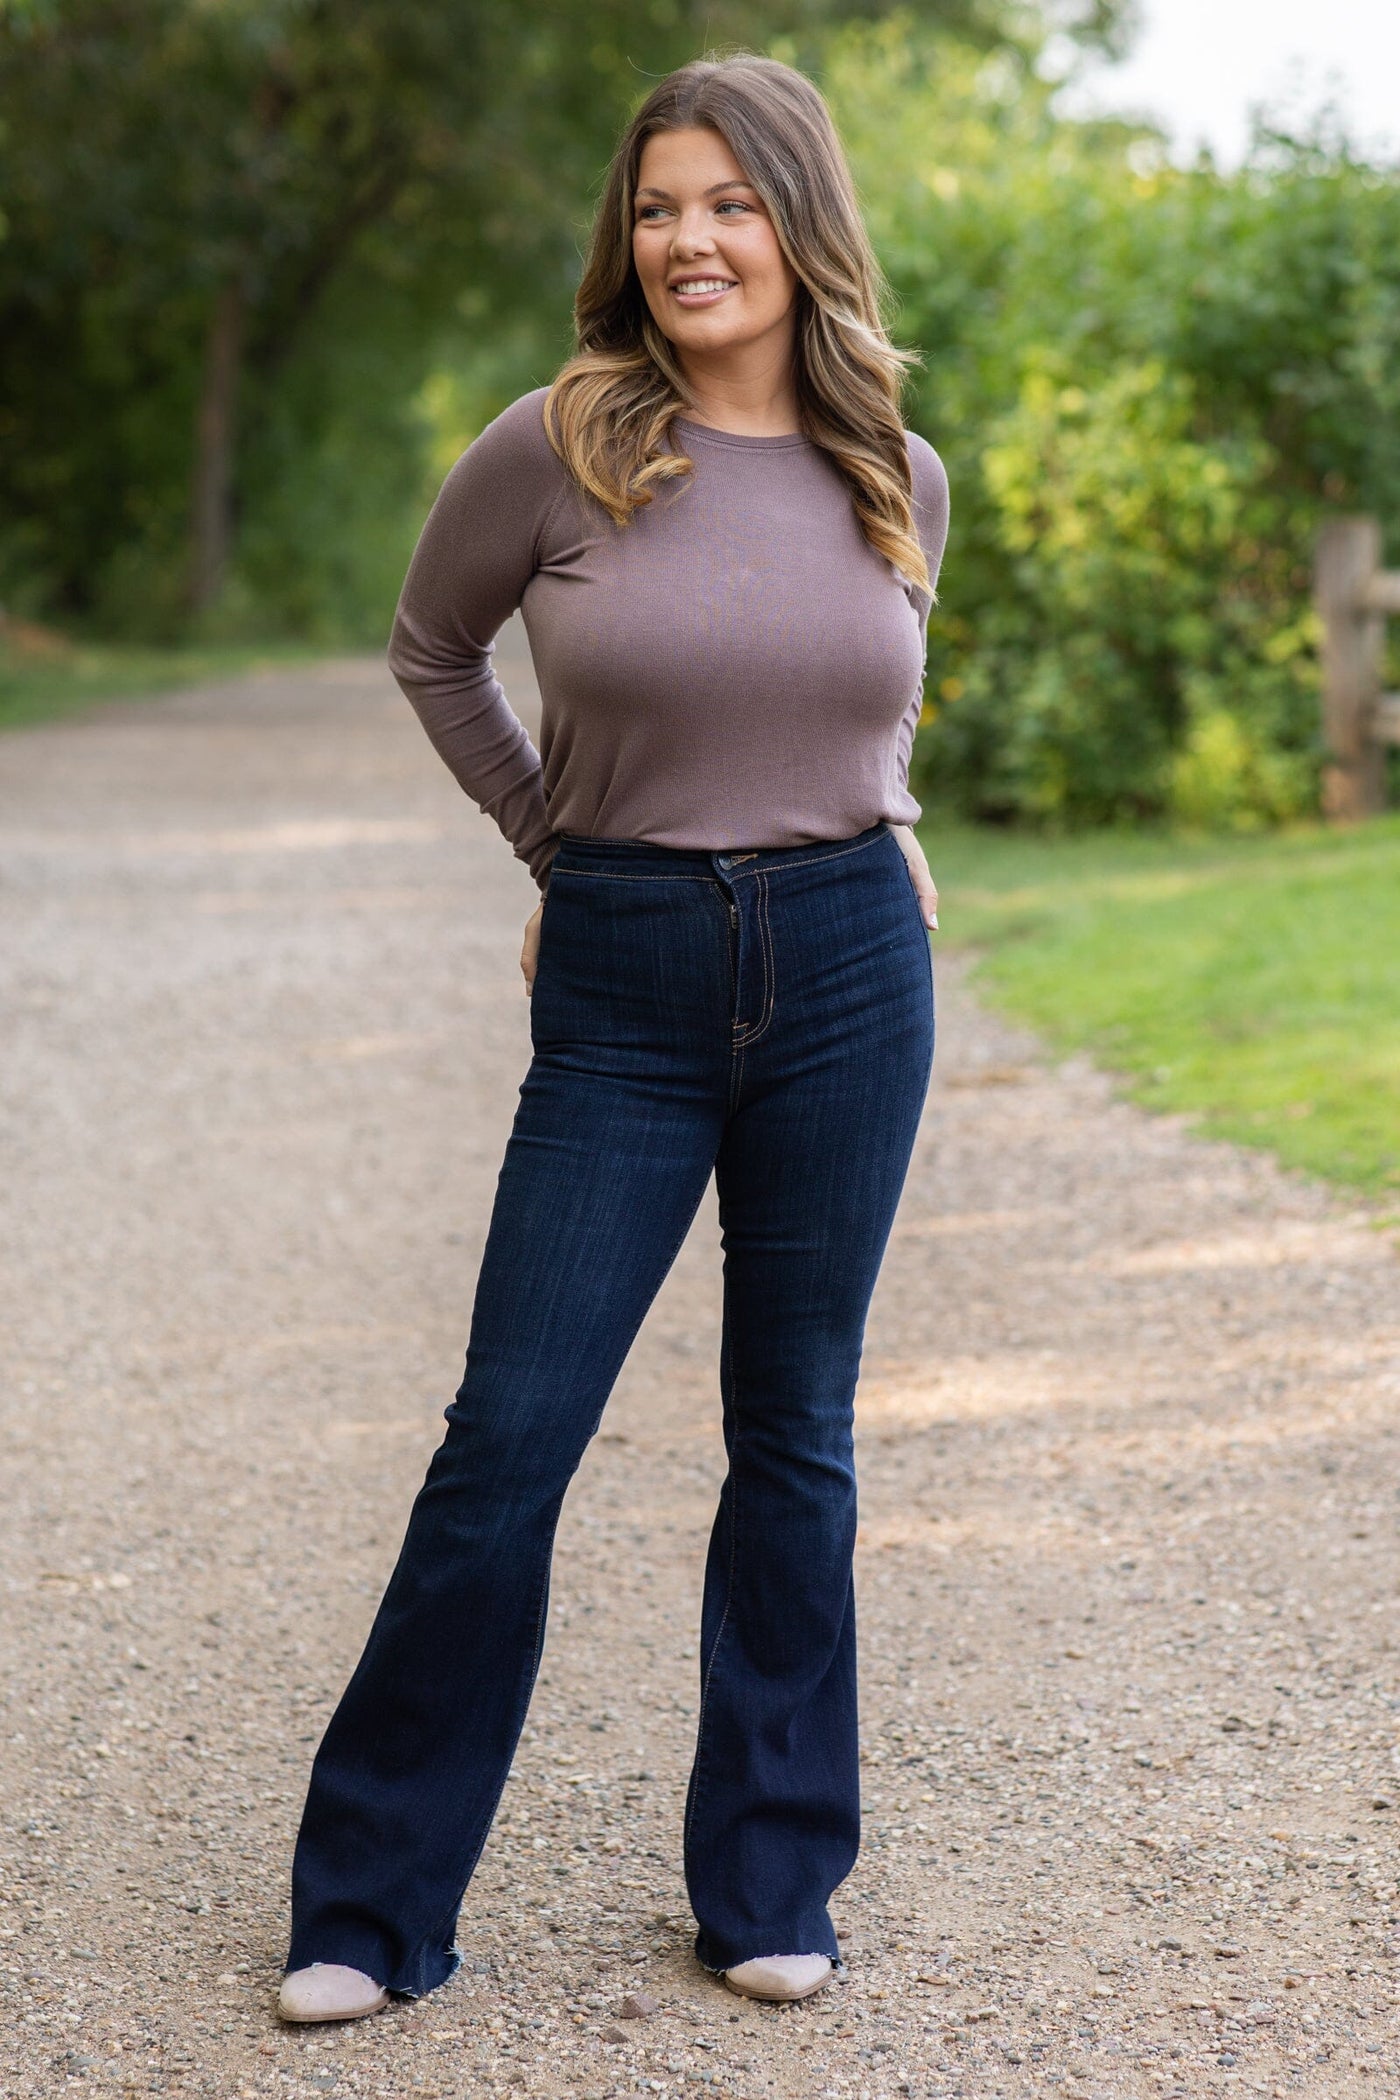 Dark Mauve Lightweight Sweater With Side Slit - Filly Flair